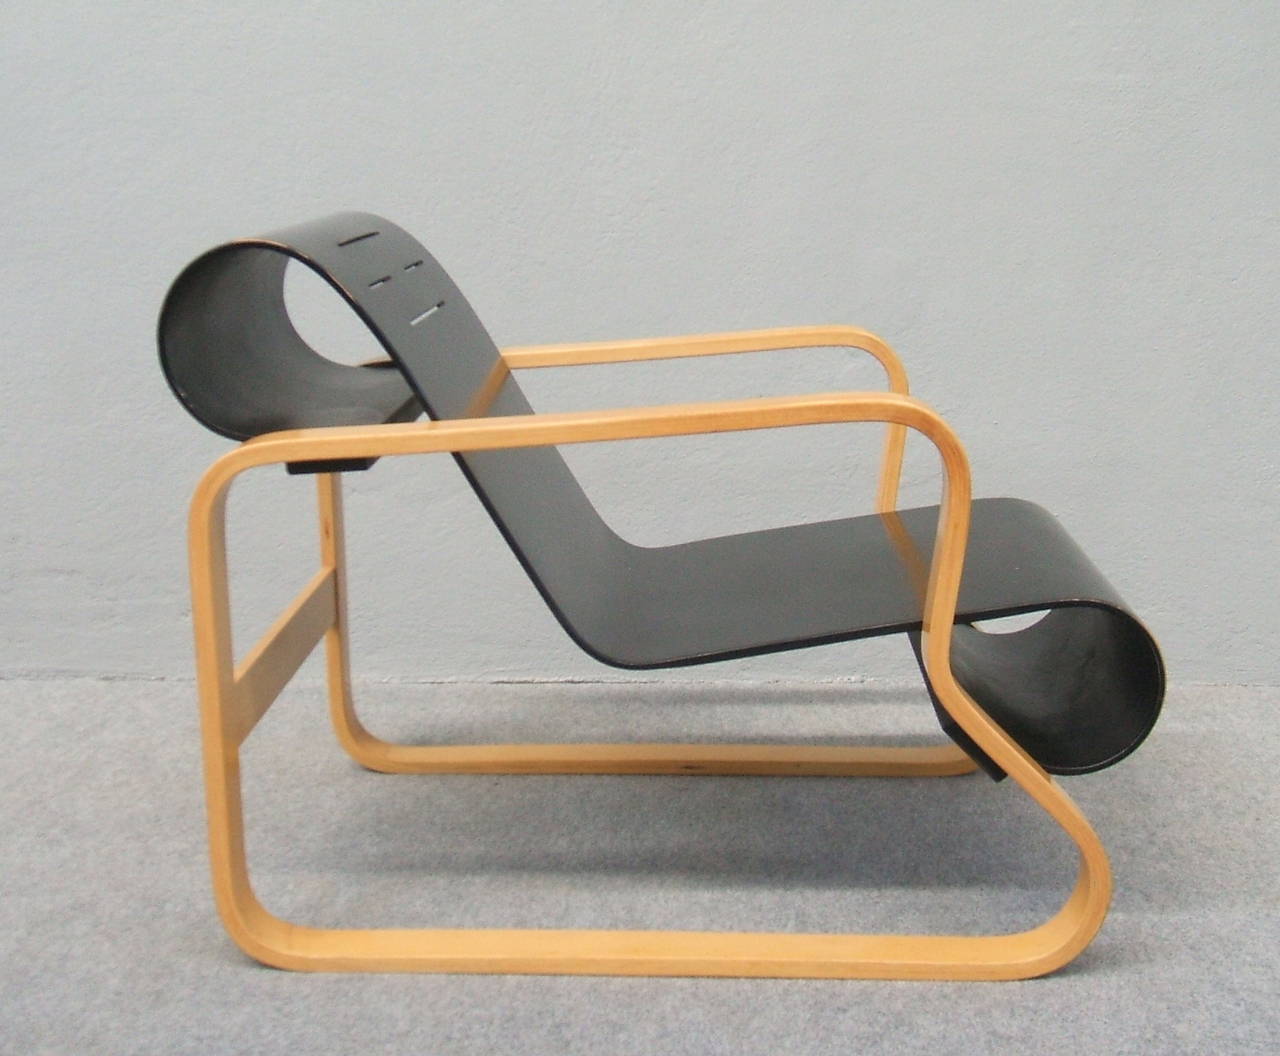 Very famous armchair  Paimio n. 41 designed by Alvar Aalto in 1932.